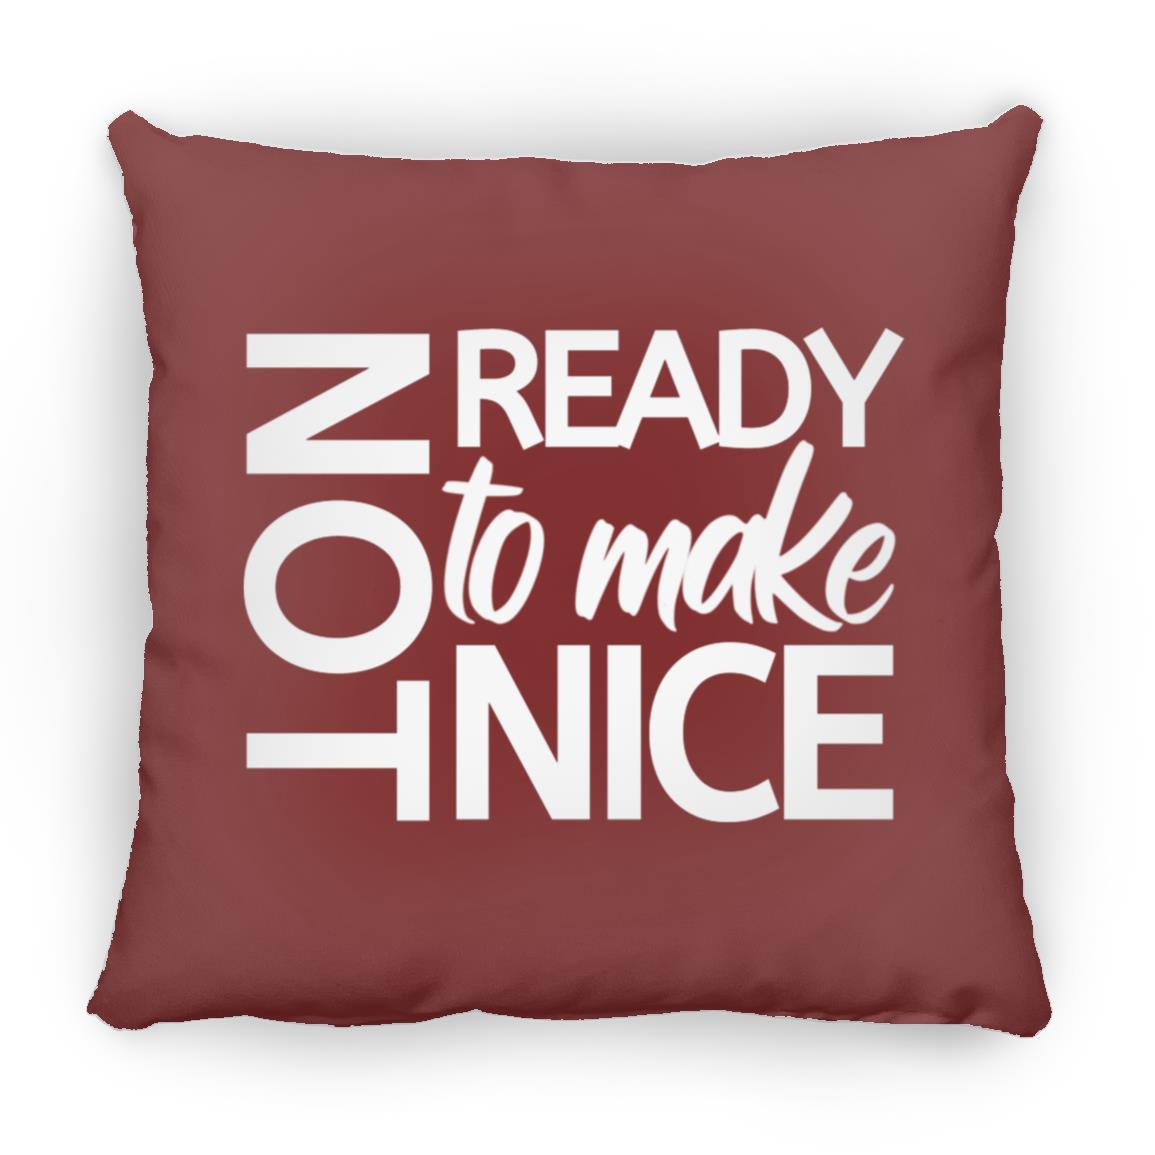 Not Ready To Make Nice Throw Pillow